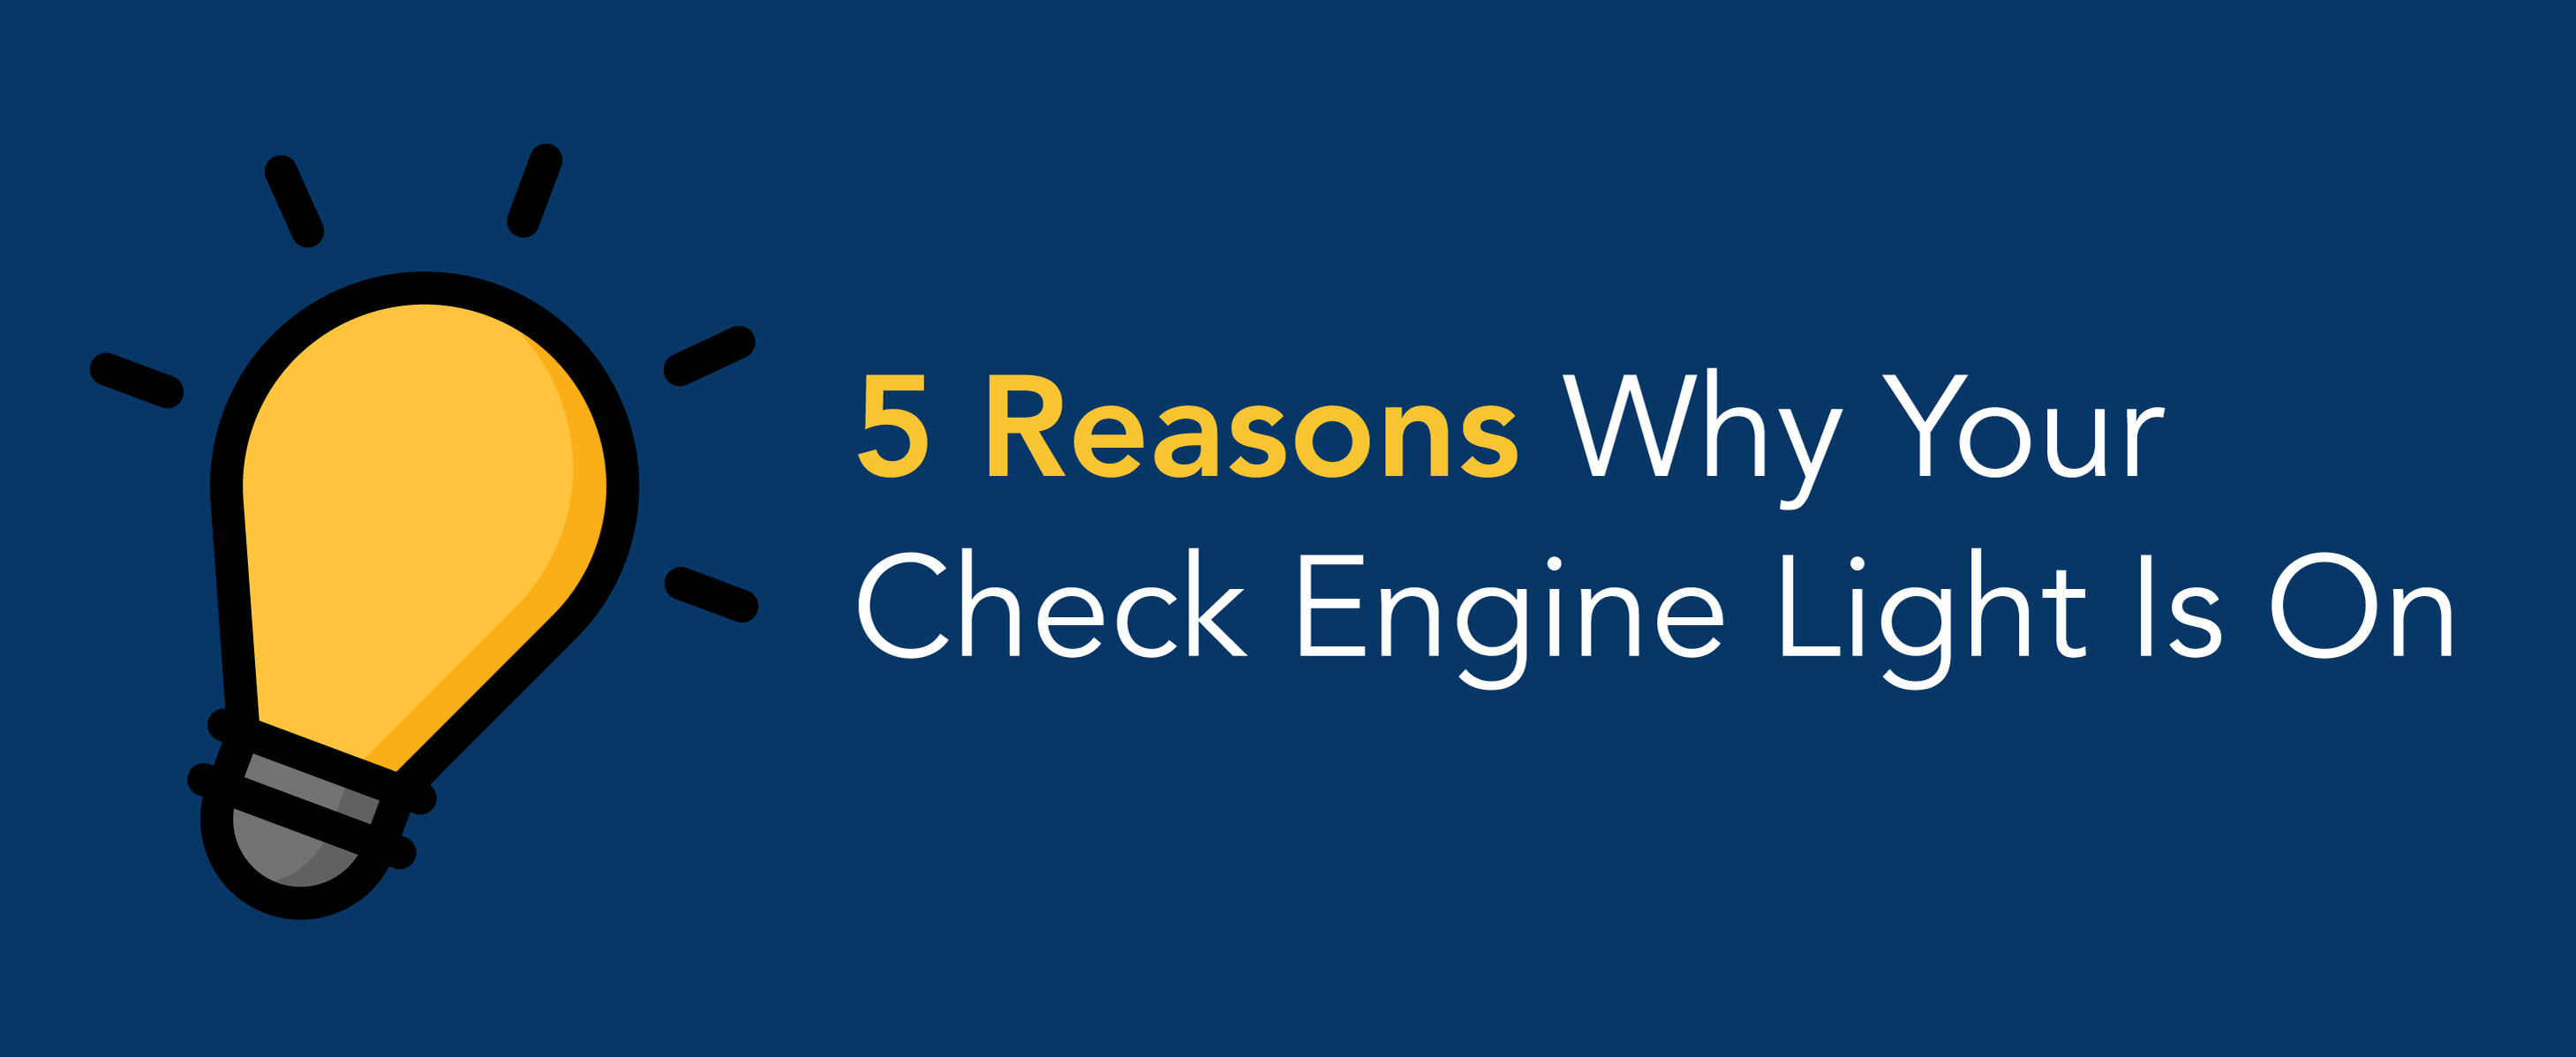 5 Reasons why your check engine light is on.